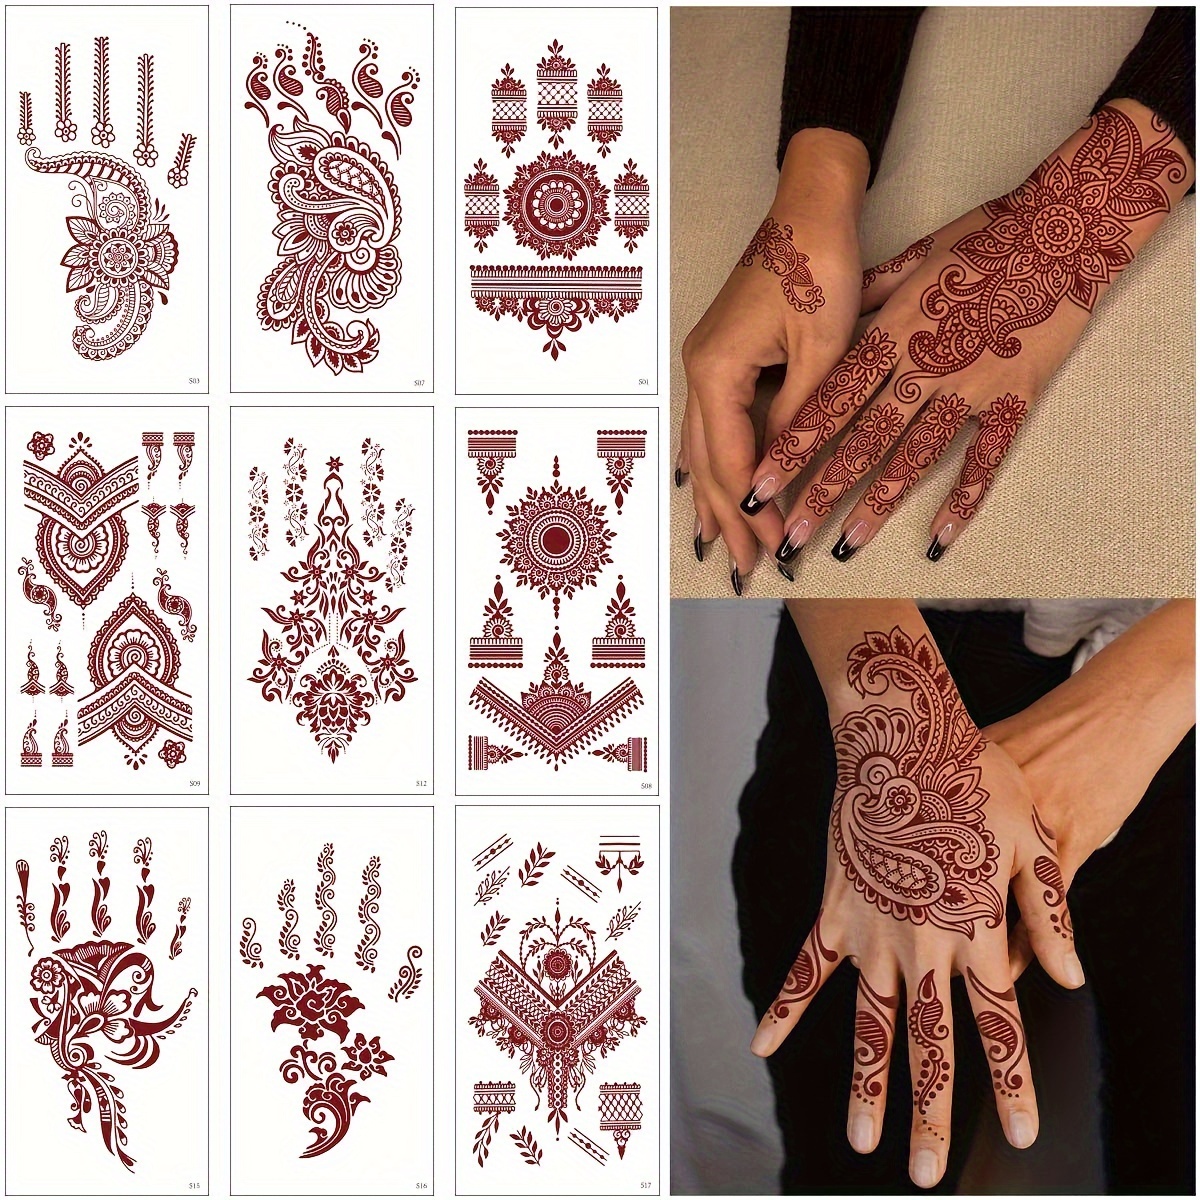 

Temporary Tattoos For Women, Waterproof Body Art Stickers, Hand Painted Henna Design, Long Lasting Fake Tattoos For Fingers And Back Of The Hand - 1pc Oblong Shape